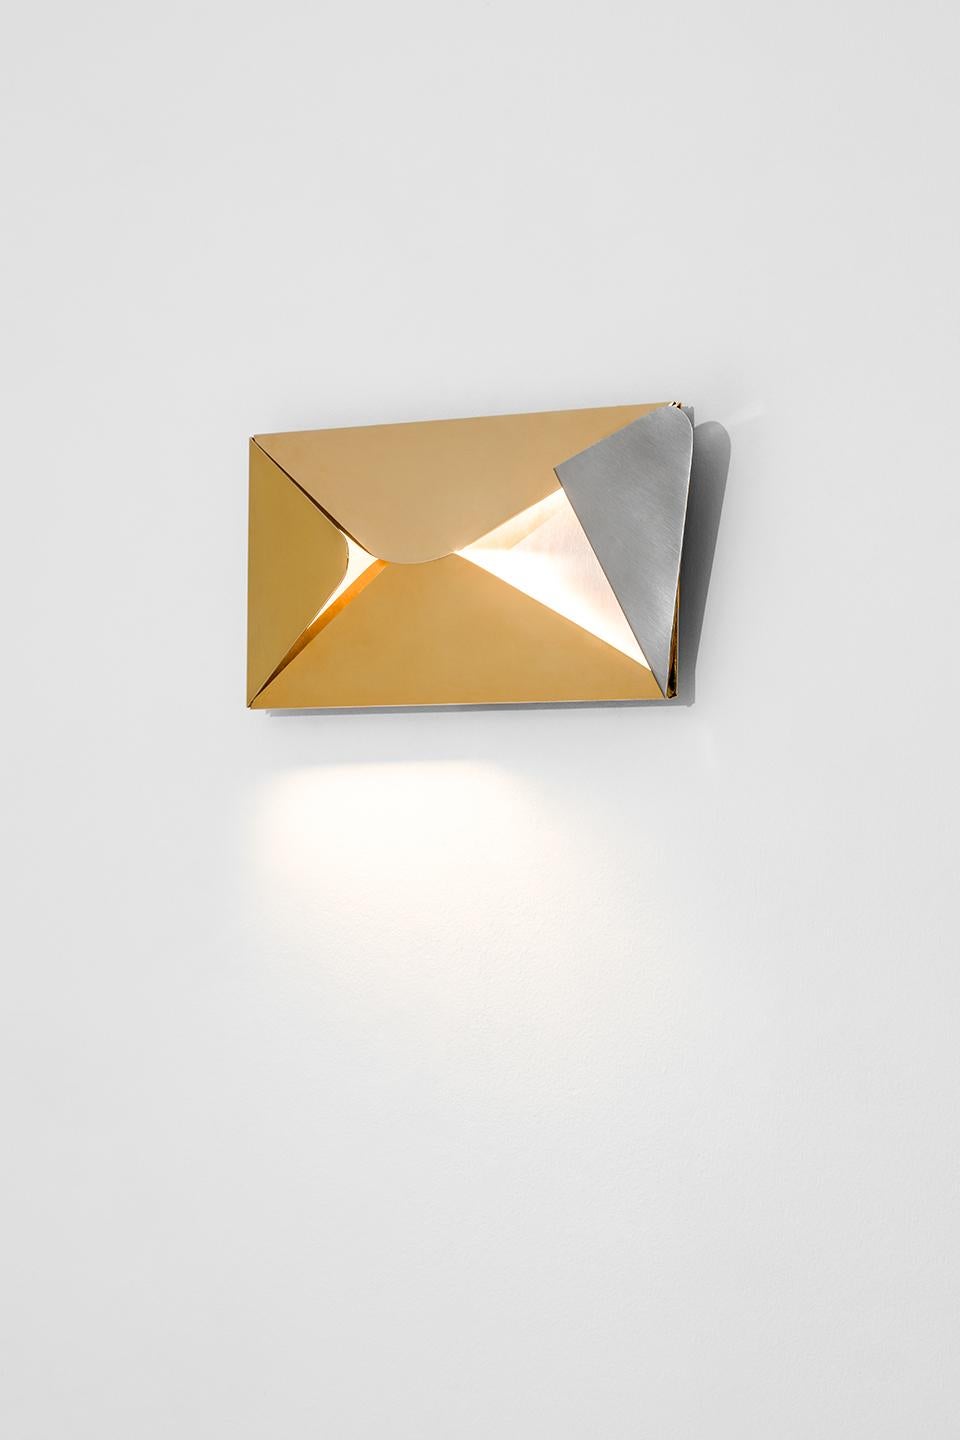 Applique in brushed steel and polished gold-plated brass.
Available in 2 styles (to be specified when ordering). Published Price is for 1 lamp.
Dimoremilano collection, by designer Dimorestudio.
Code: Applique121 
22% VAT WILL BE ADDED ON EUROPEAN